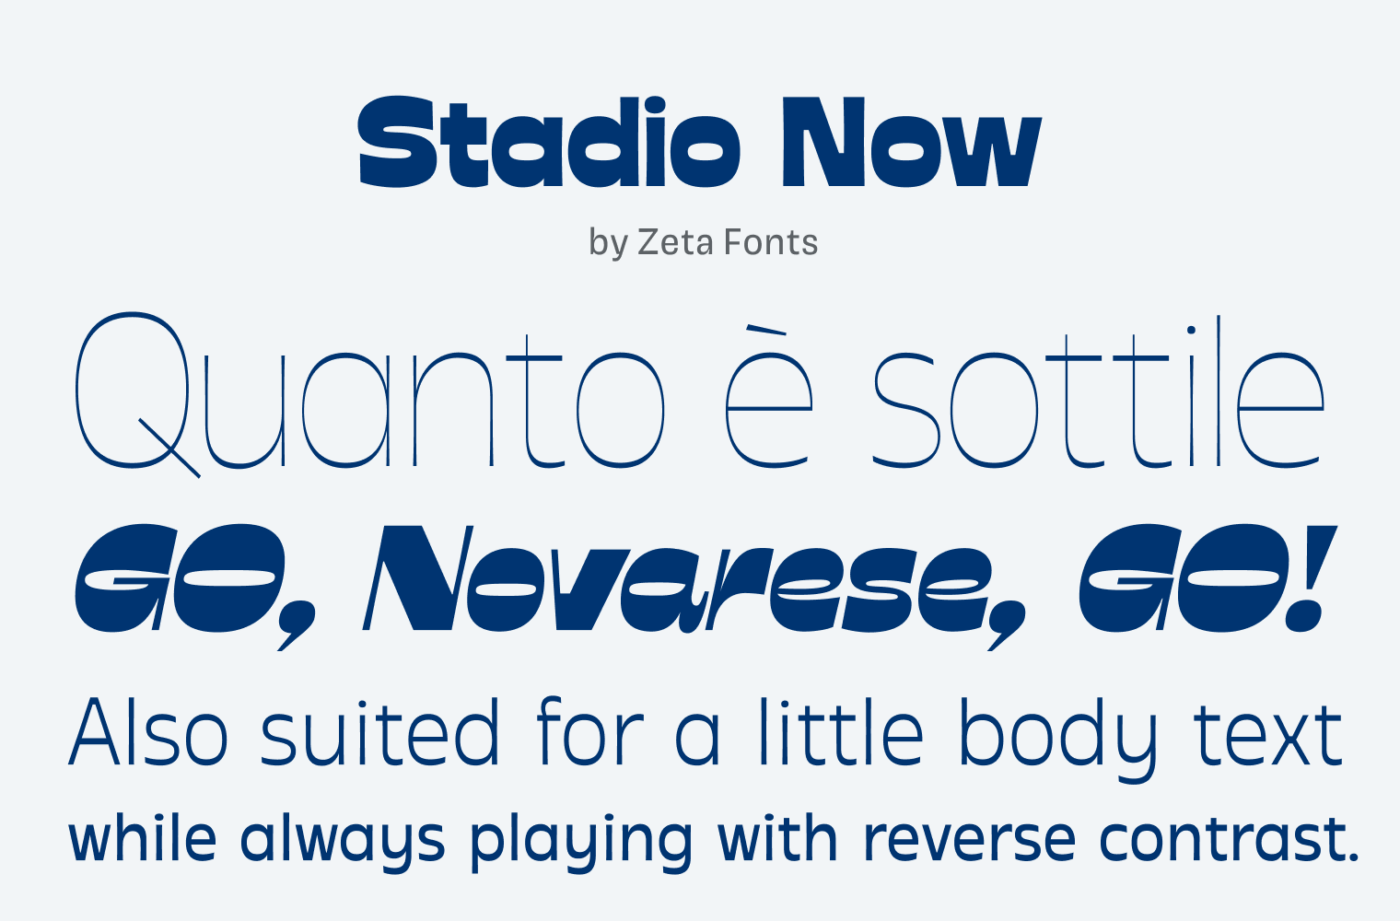 Stadio Now
by Zeta Fonts
Quanto è sottie
3, Neverese, ?!
Also suited for a little body text while always playing with reverse contrast.